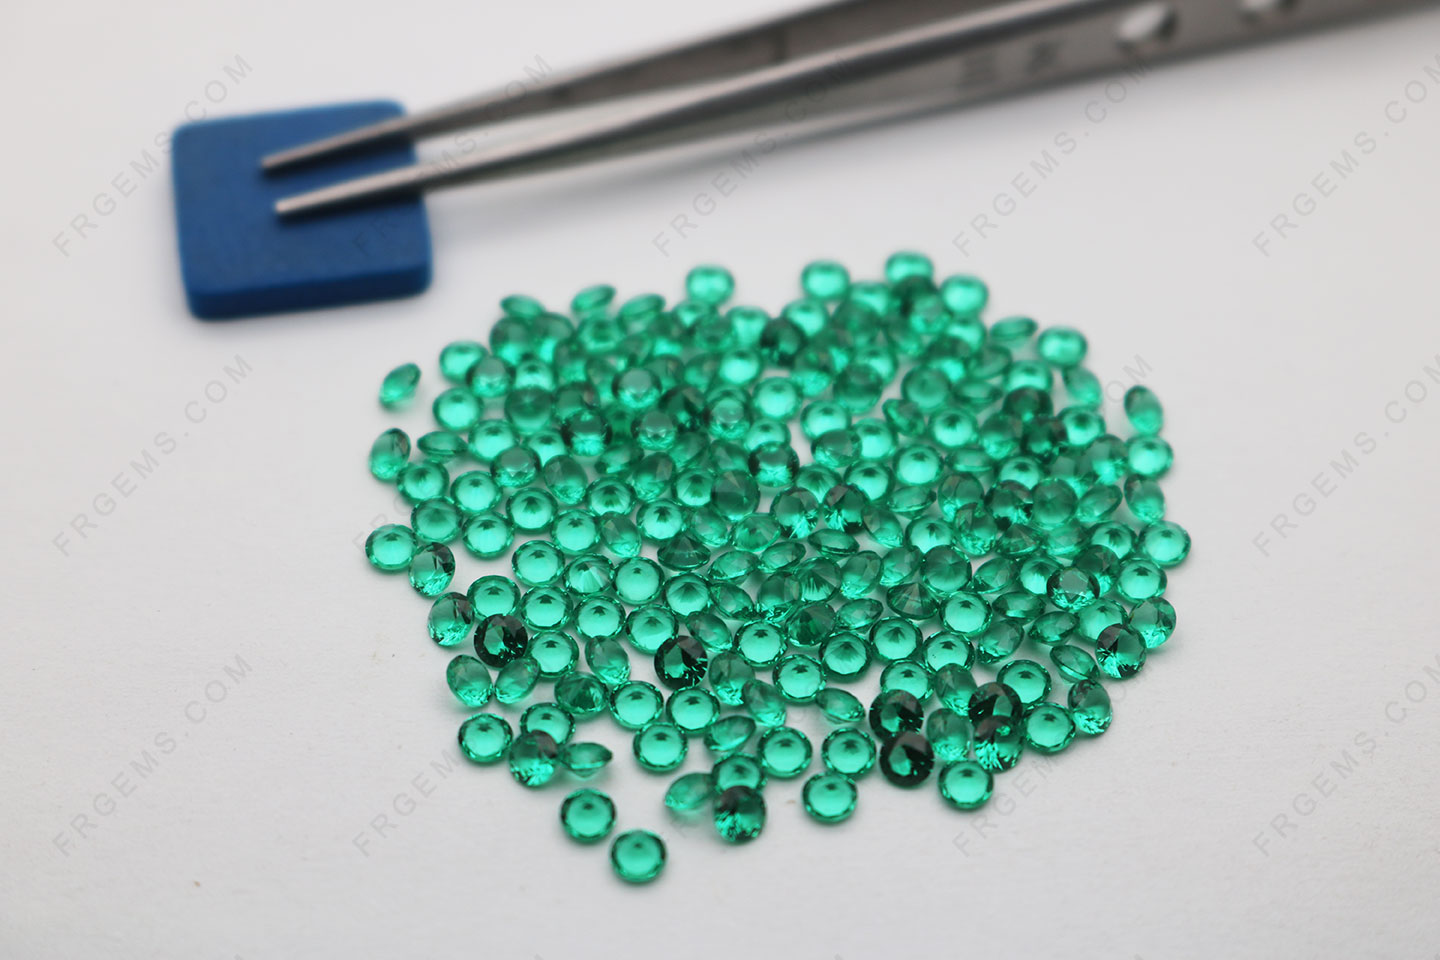 Wholesale Loose Nano Emerald Green #113 Color Round Shape Faceted Cut 3mm gemstones